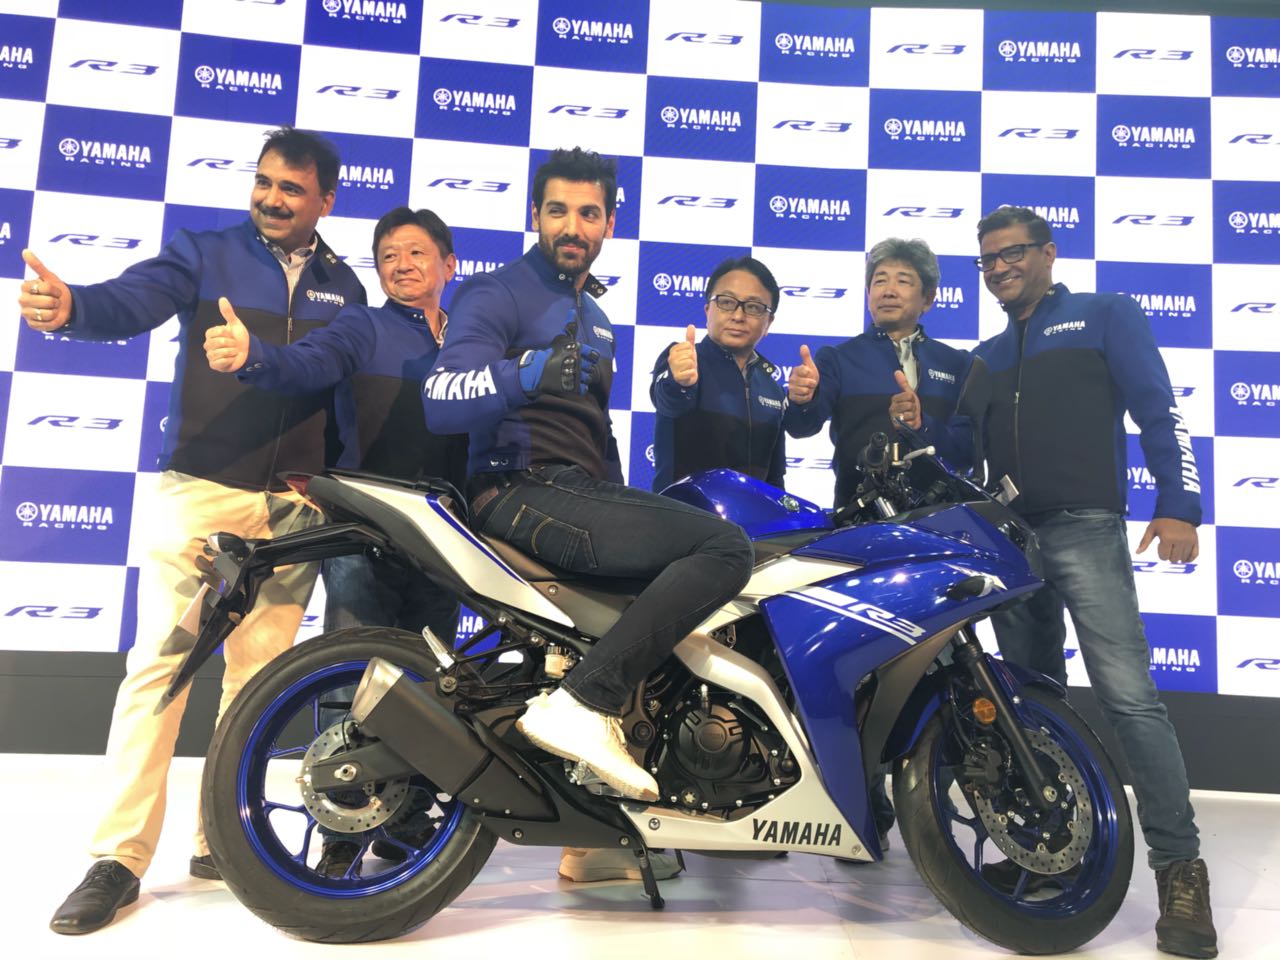 <p><a href="http://overdrive.in/news-cars-auto/auto-expo-2018-new-yamaha-yzf-r3-with-dual-channel-abs-launched-in-india-at-rs-3-48-lakh/">The Yamaha YZF-R3 was unveiled by John Abraham. It is priced at Rs. 3.48 lakh, ex-showroom, Delhi. </a>Bookings will open today!&nbsp;&nbsp;Delivery by month end</p>